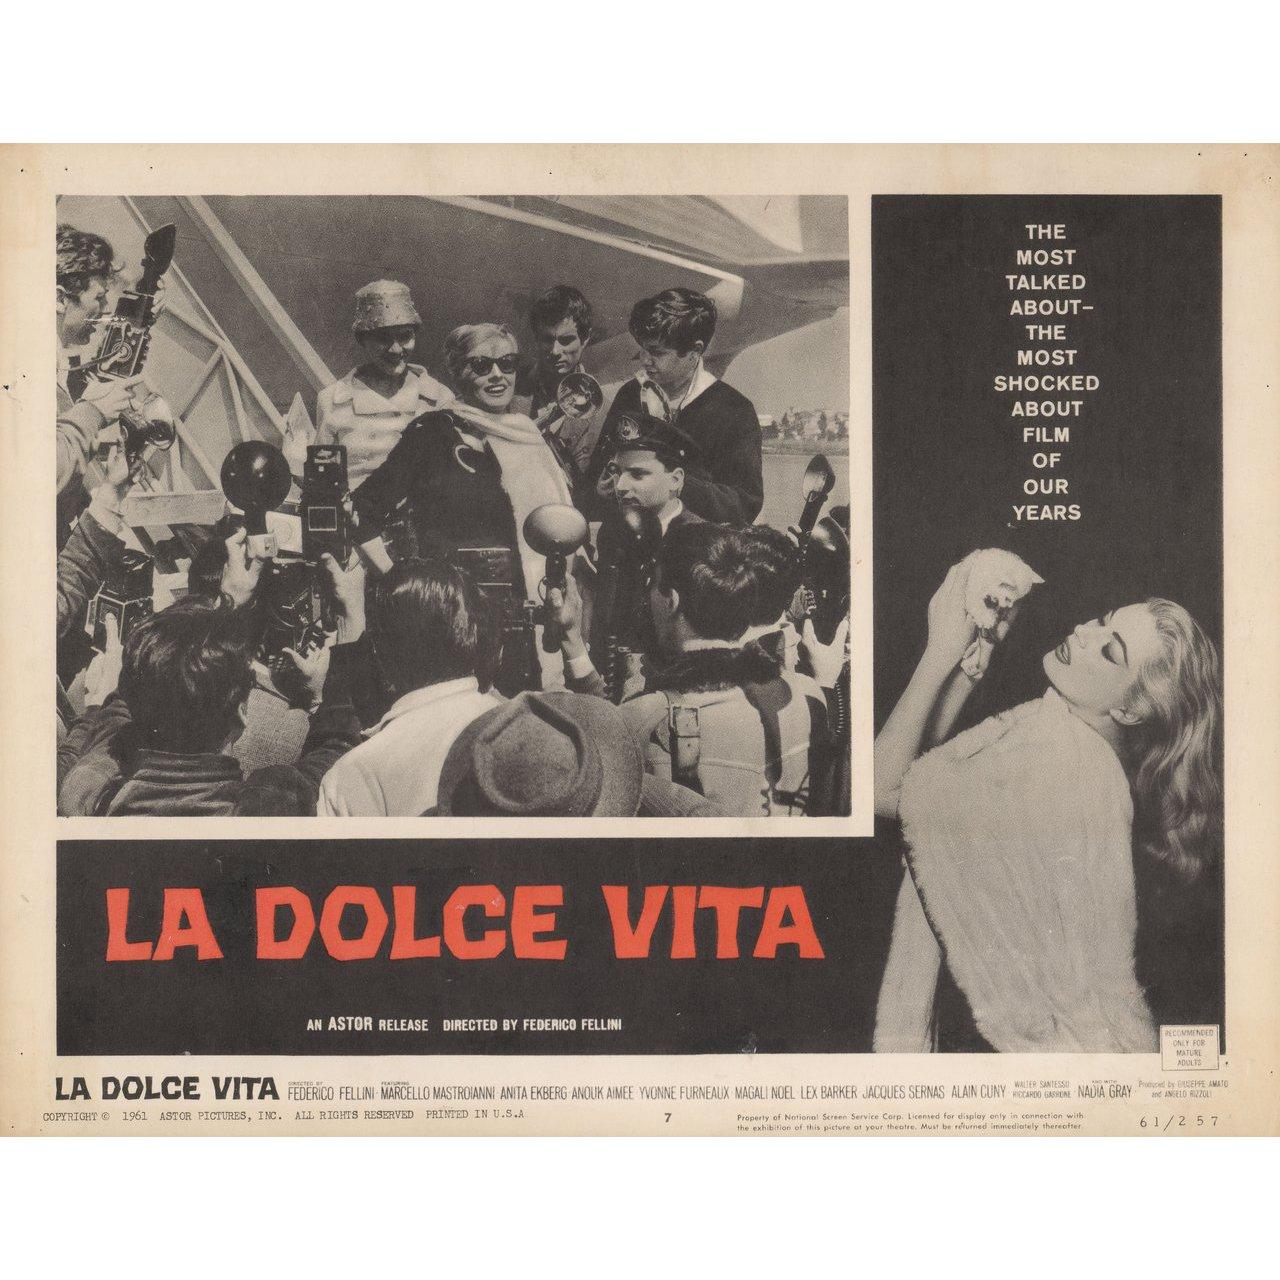 Original 1961 U.S. scene card for the film La Dolce Vita directed by Federico Fellini with Marcello Mastroianni / Anita Ekberg / Anouk Aimee / Yvonne Furneaux. Very Good-Fine condition, pinholes. Please note: the size is stated in inches and the